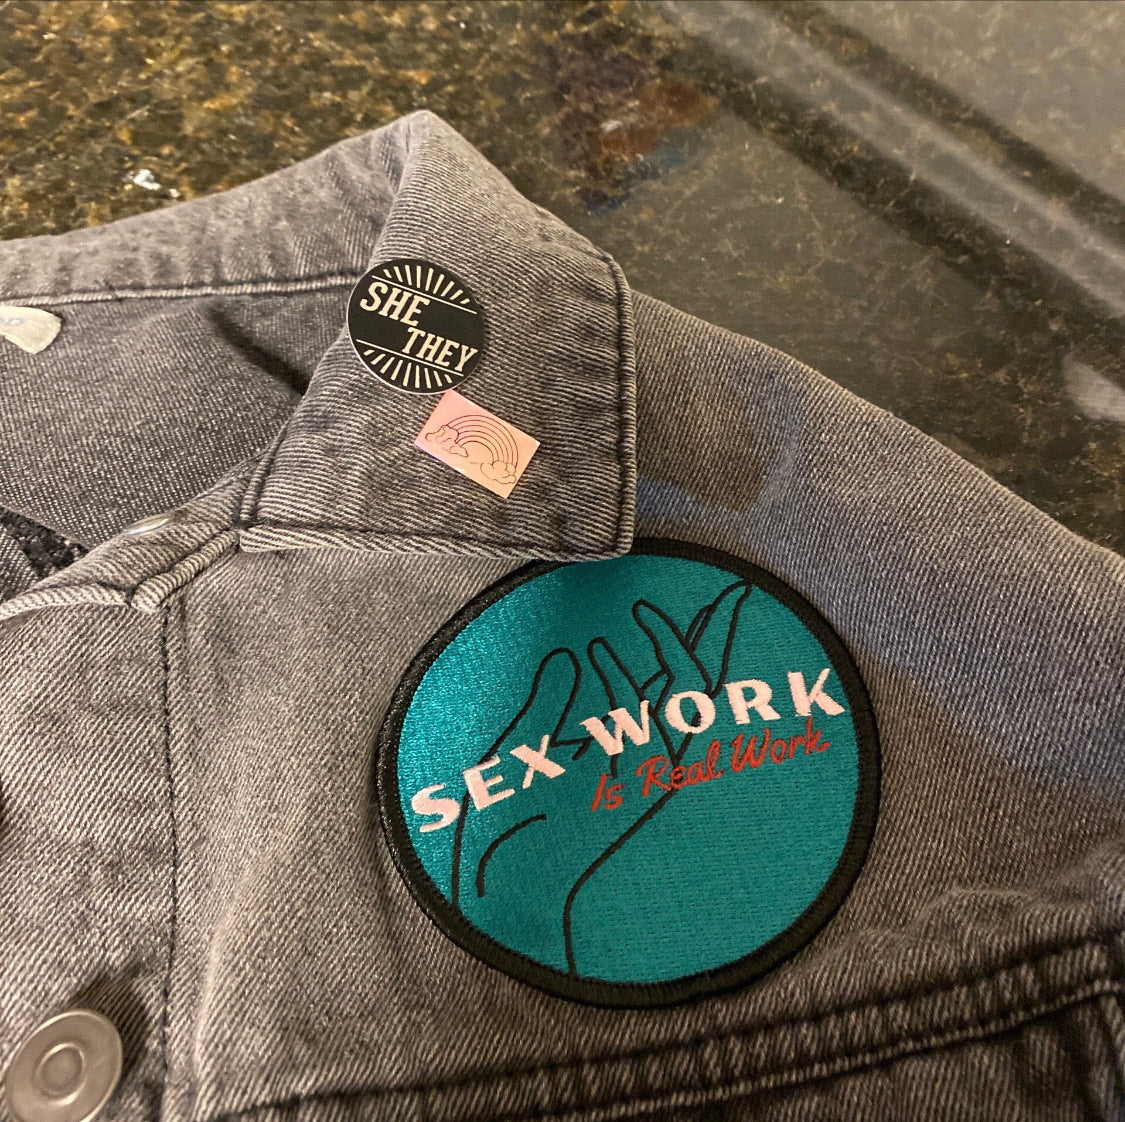 Sex Work is Real Work PATCH